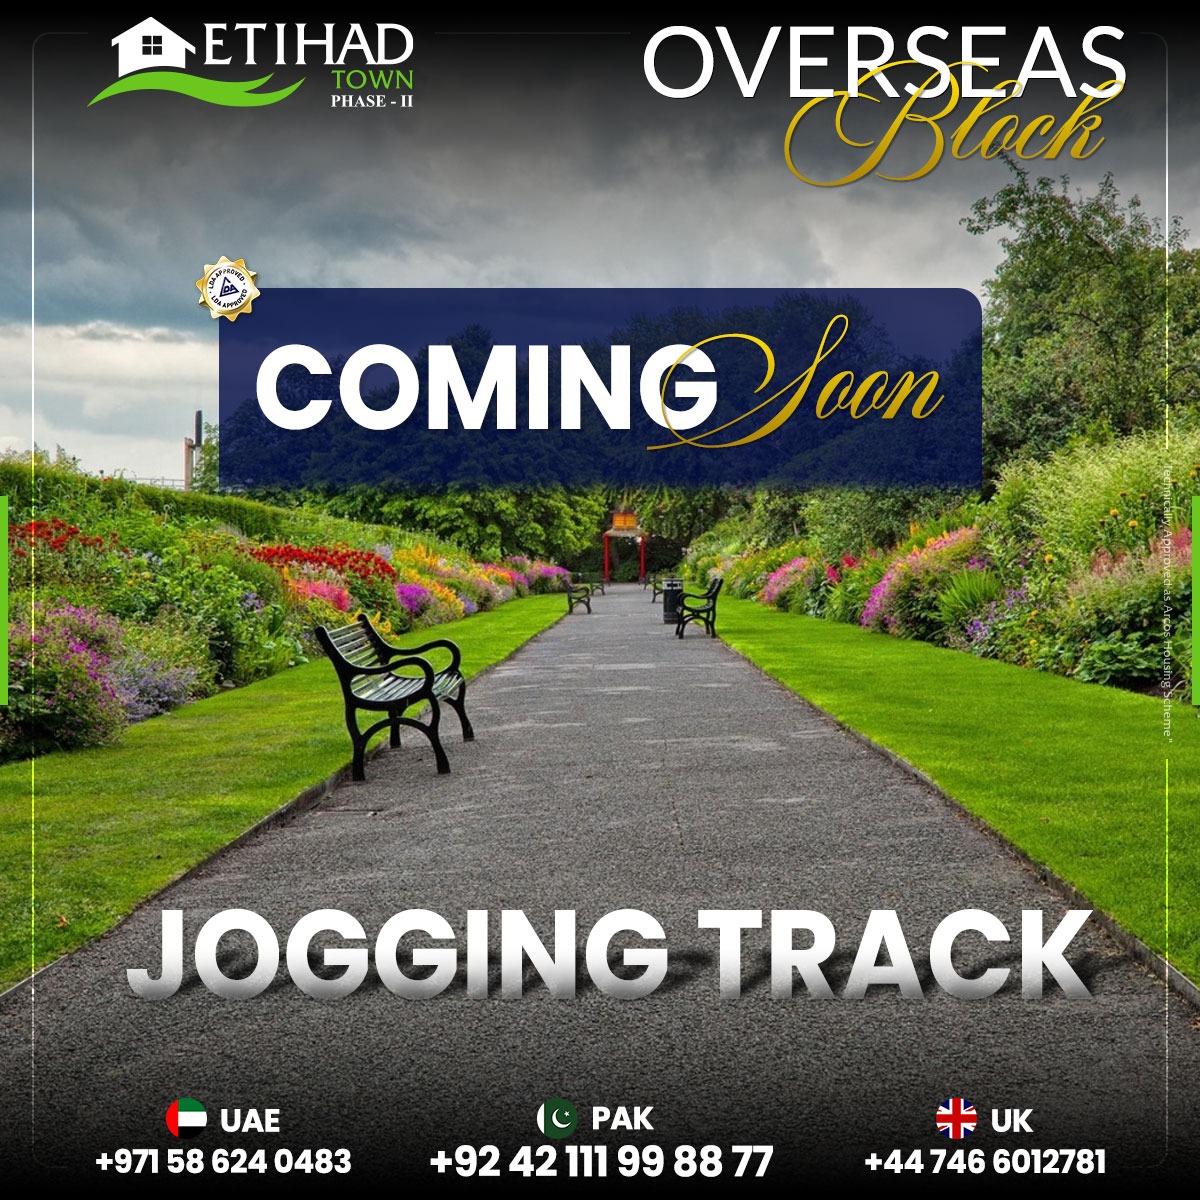 Big news from Etihad Town Phase II! Introducing the Overseas block with top-notch amenities! 🏡 Act fast to seize fantastic deals and dive into a golden investment opportunity! 🚀

For more information,
🇵🇰📲 (042) 111 99 88 77

#EtihadTownPhase2 #overseasblock